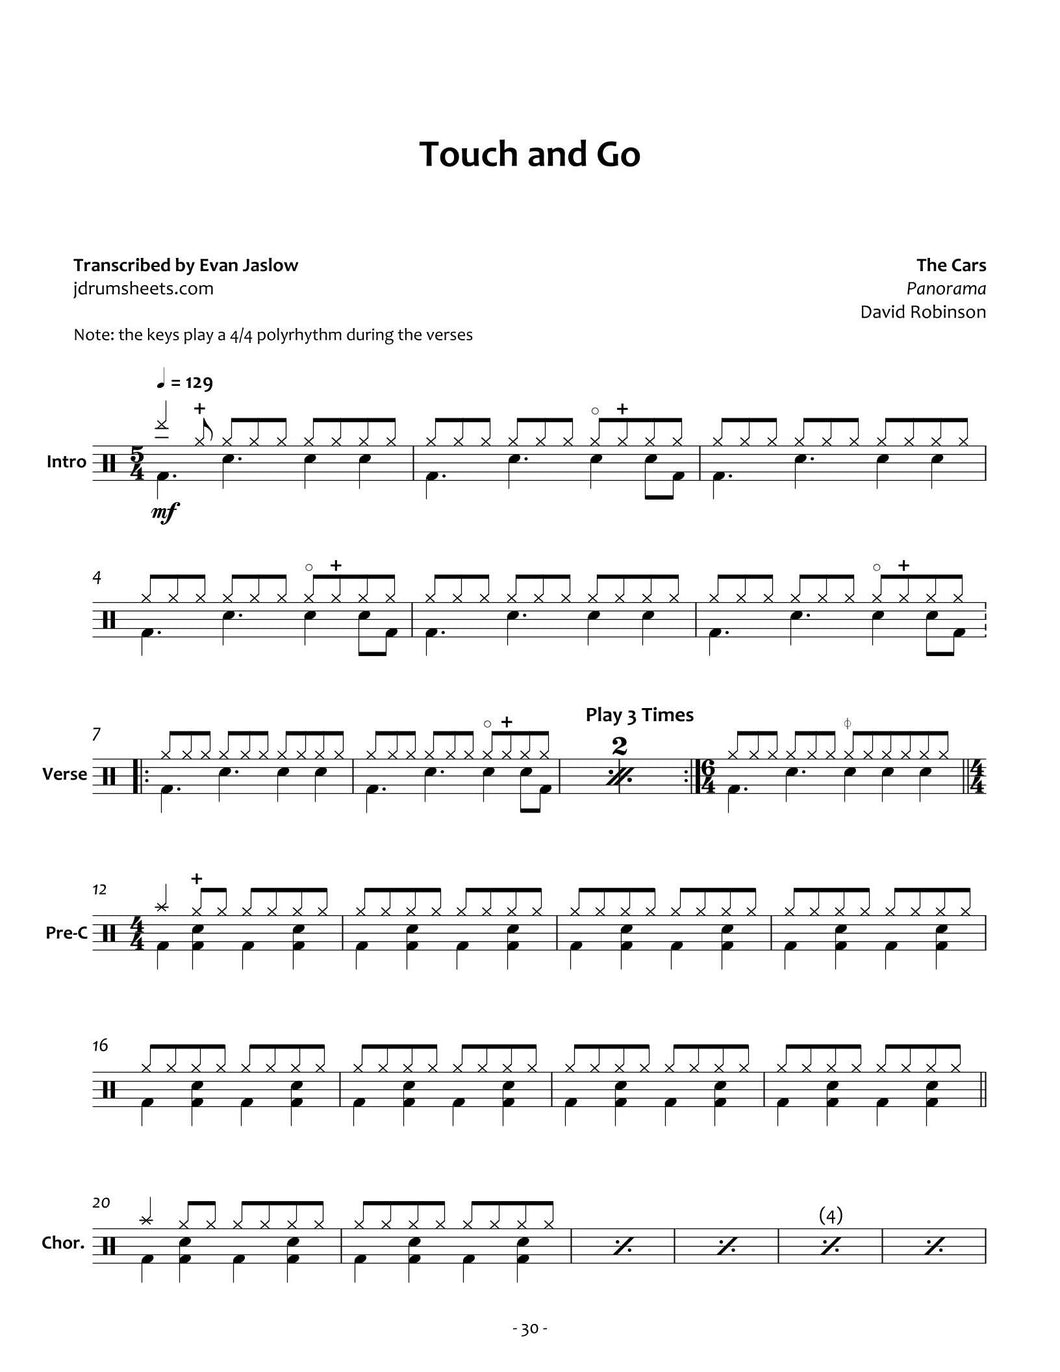 Touch and Go - The Cars - Full Drum Transcription / Drum Sheet Music - Jaslow Drum Sheets